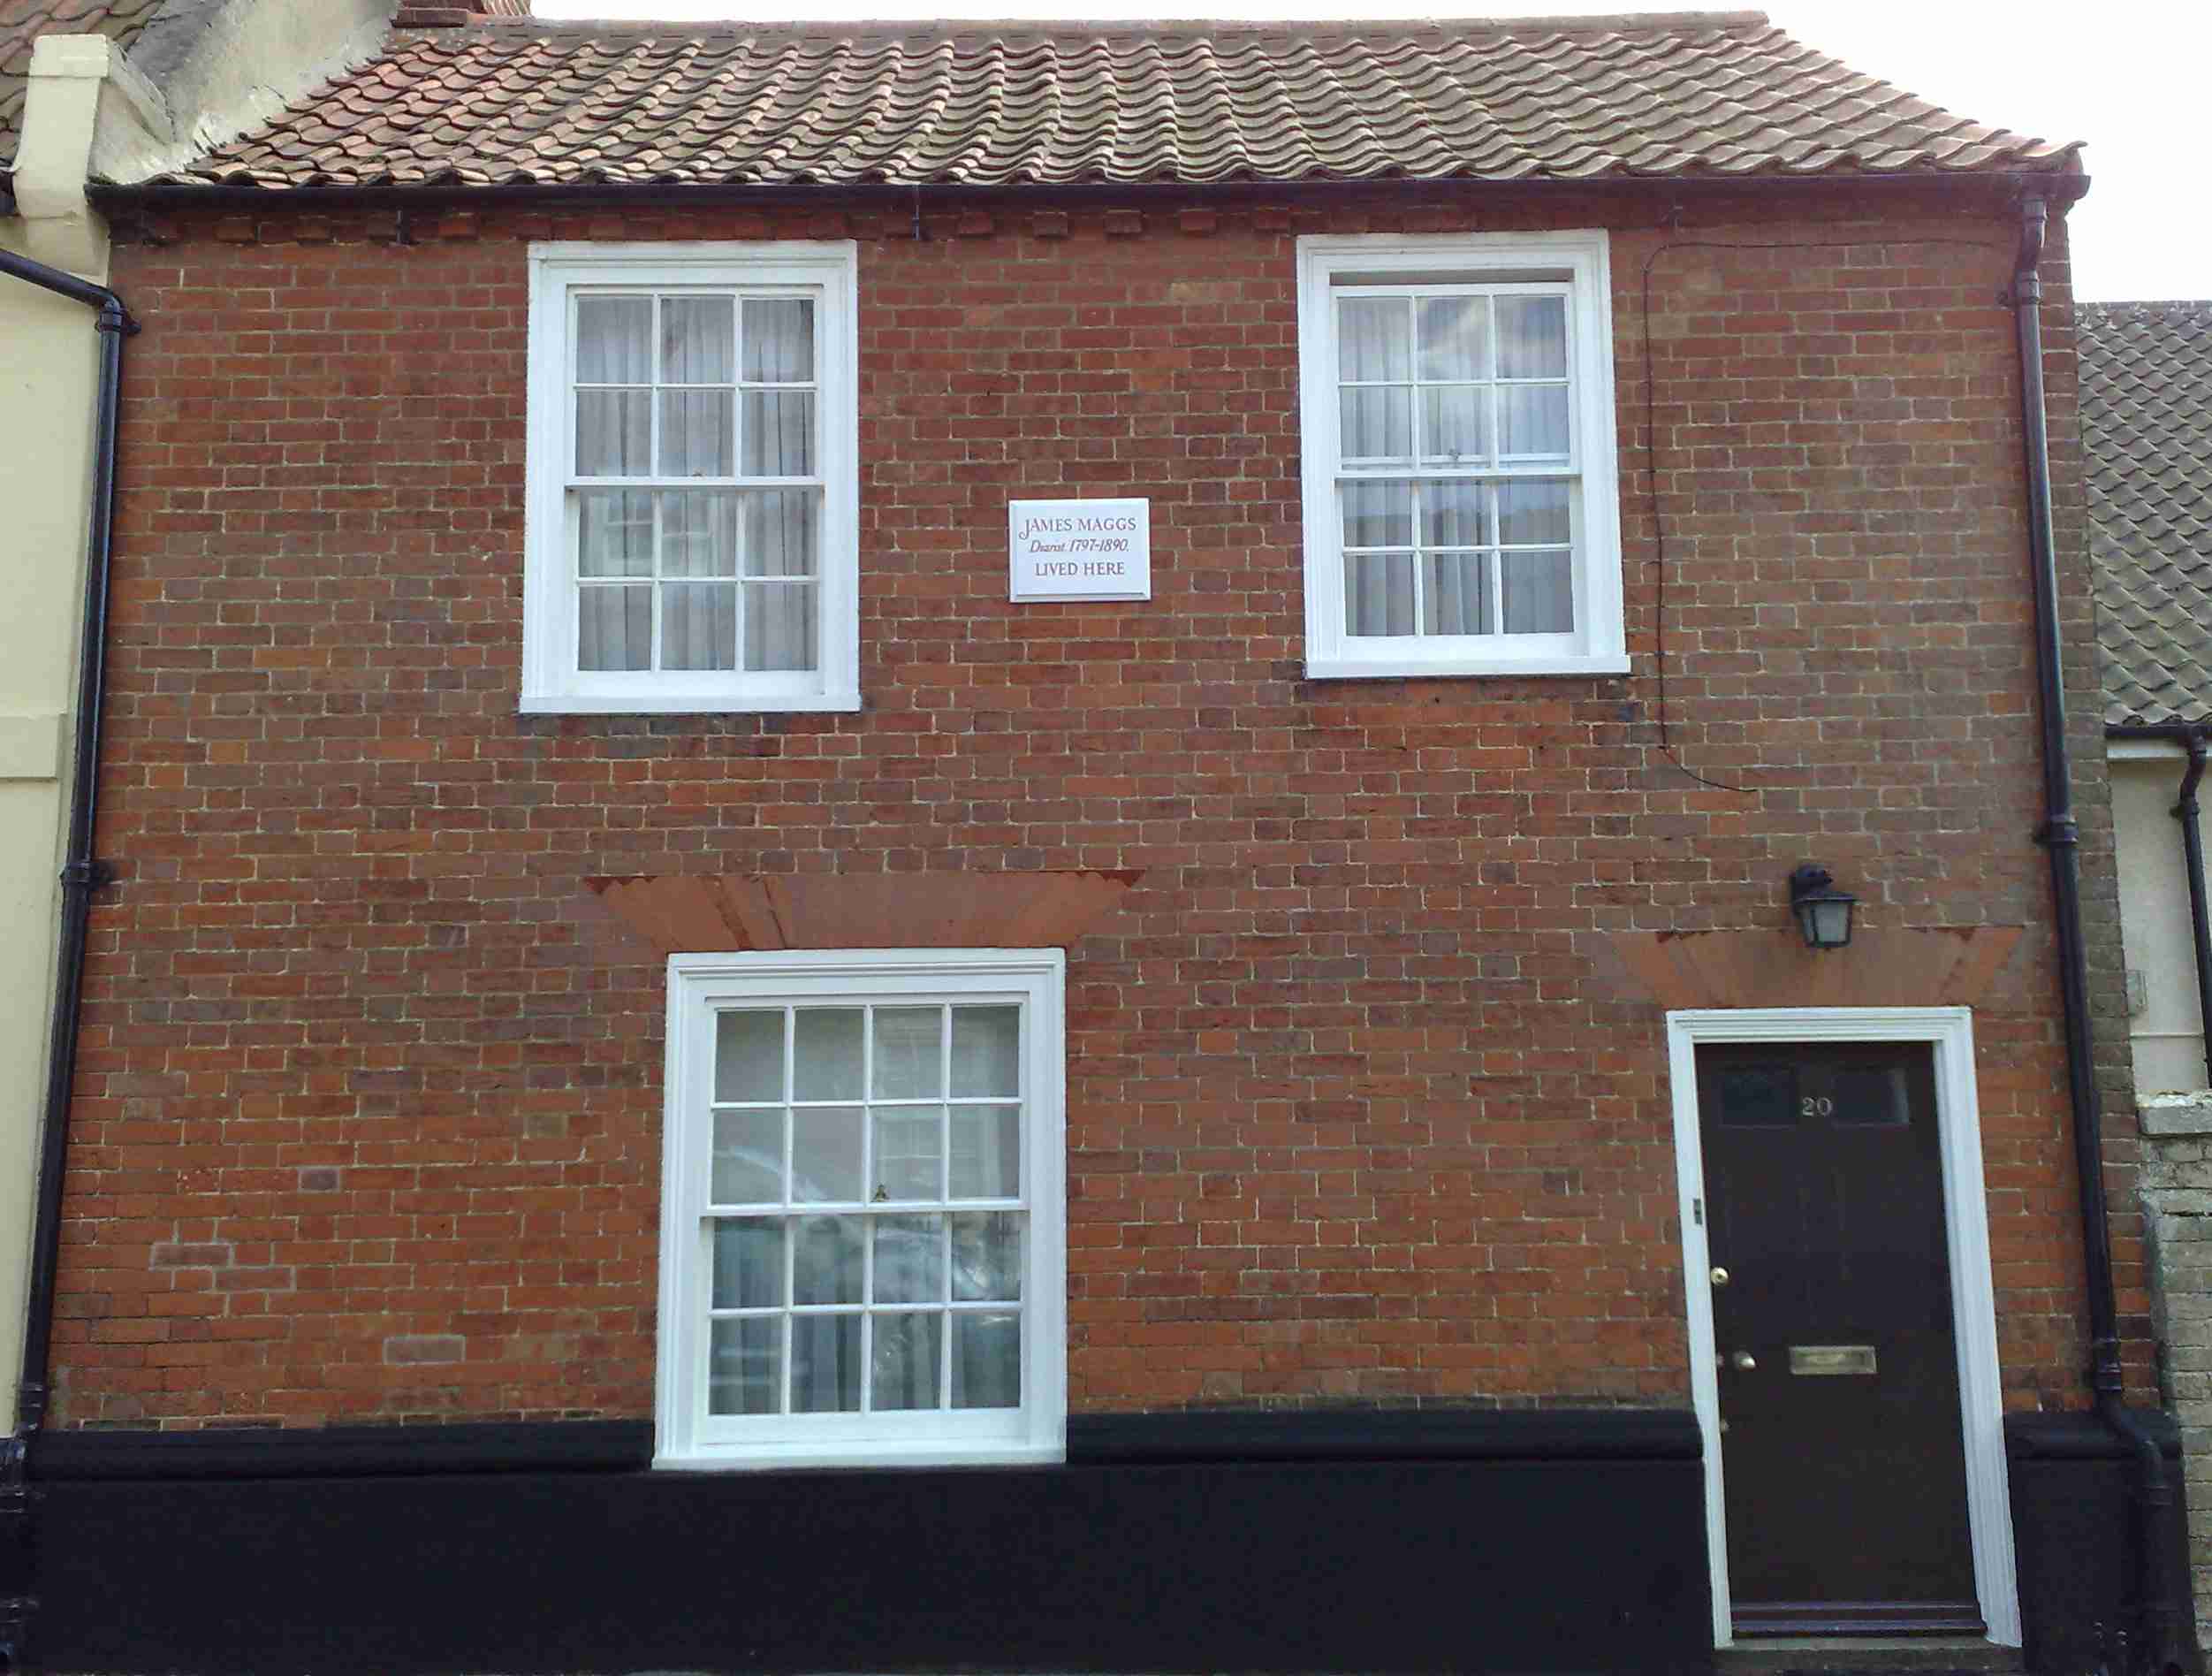 House in Southwold where James Maggs lived